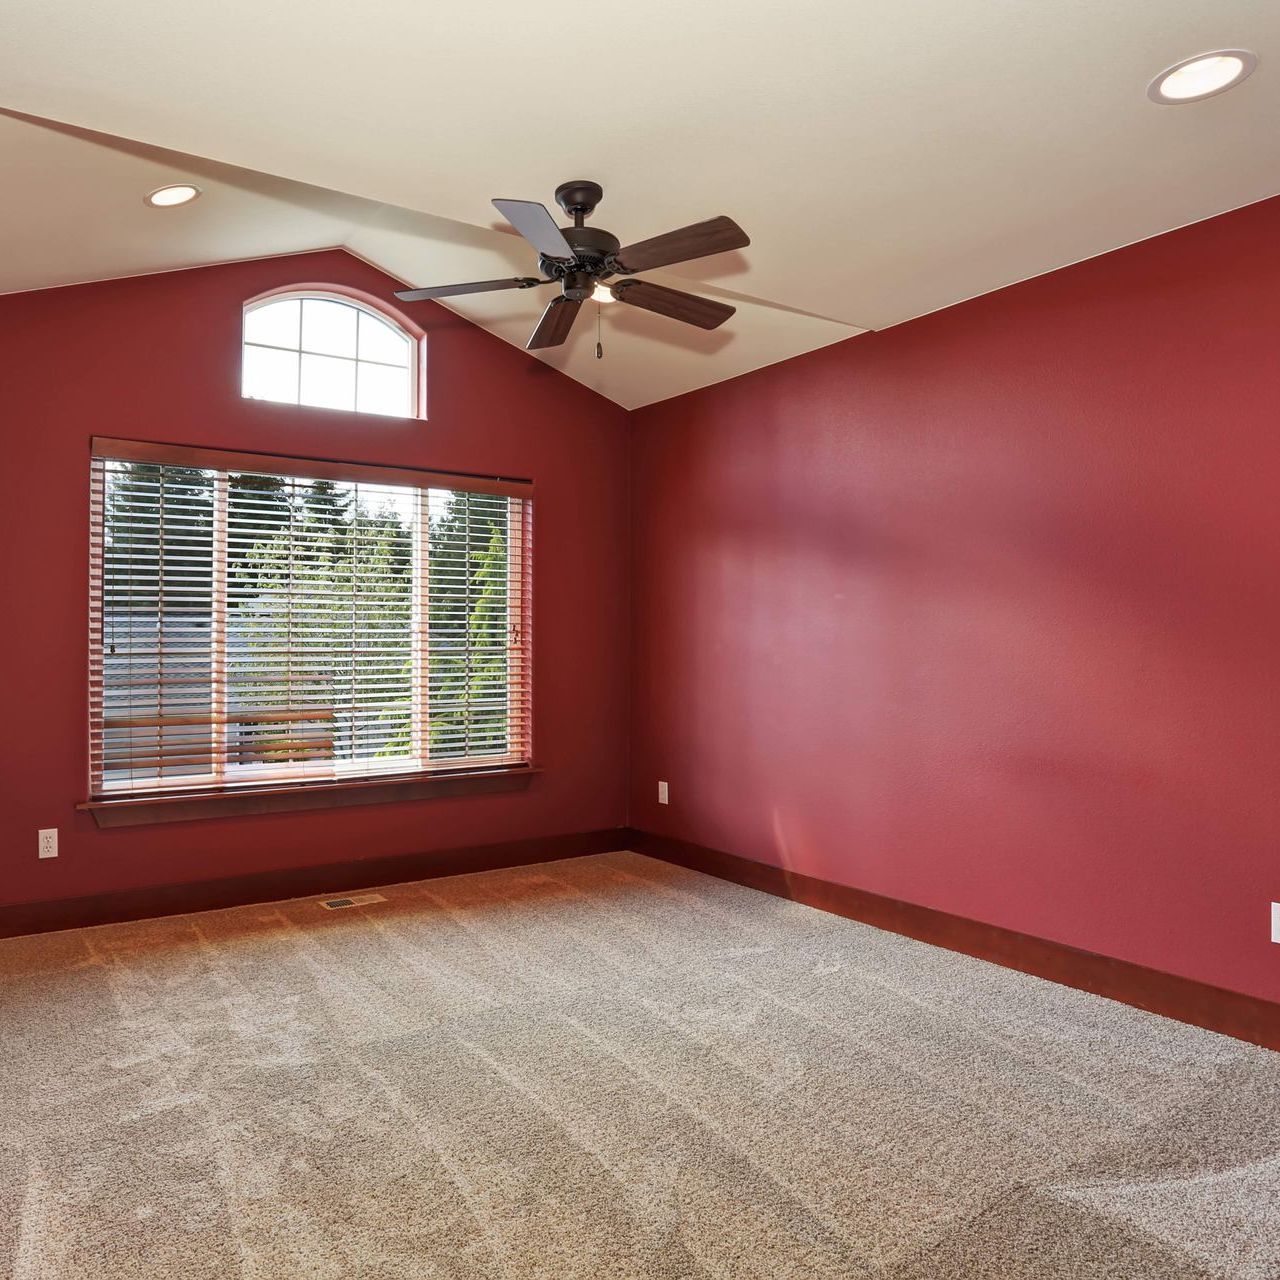 An empty bedroom with red walls and a ceiling fan.